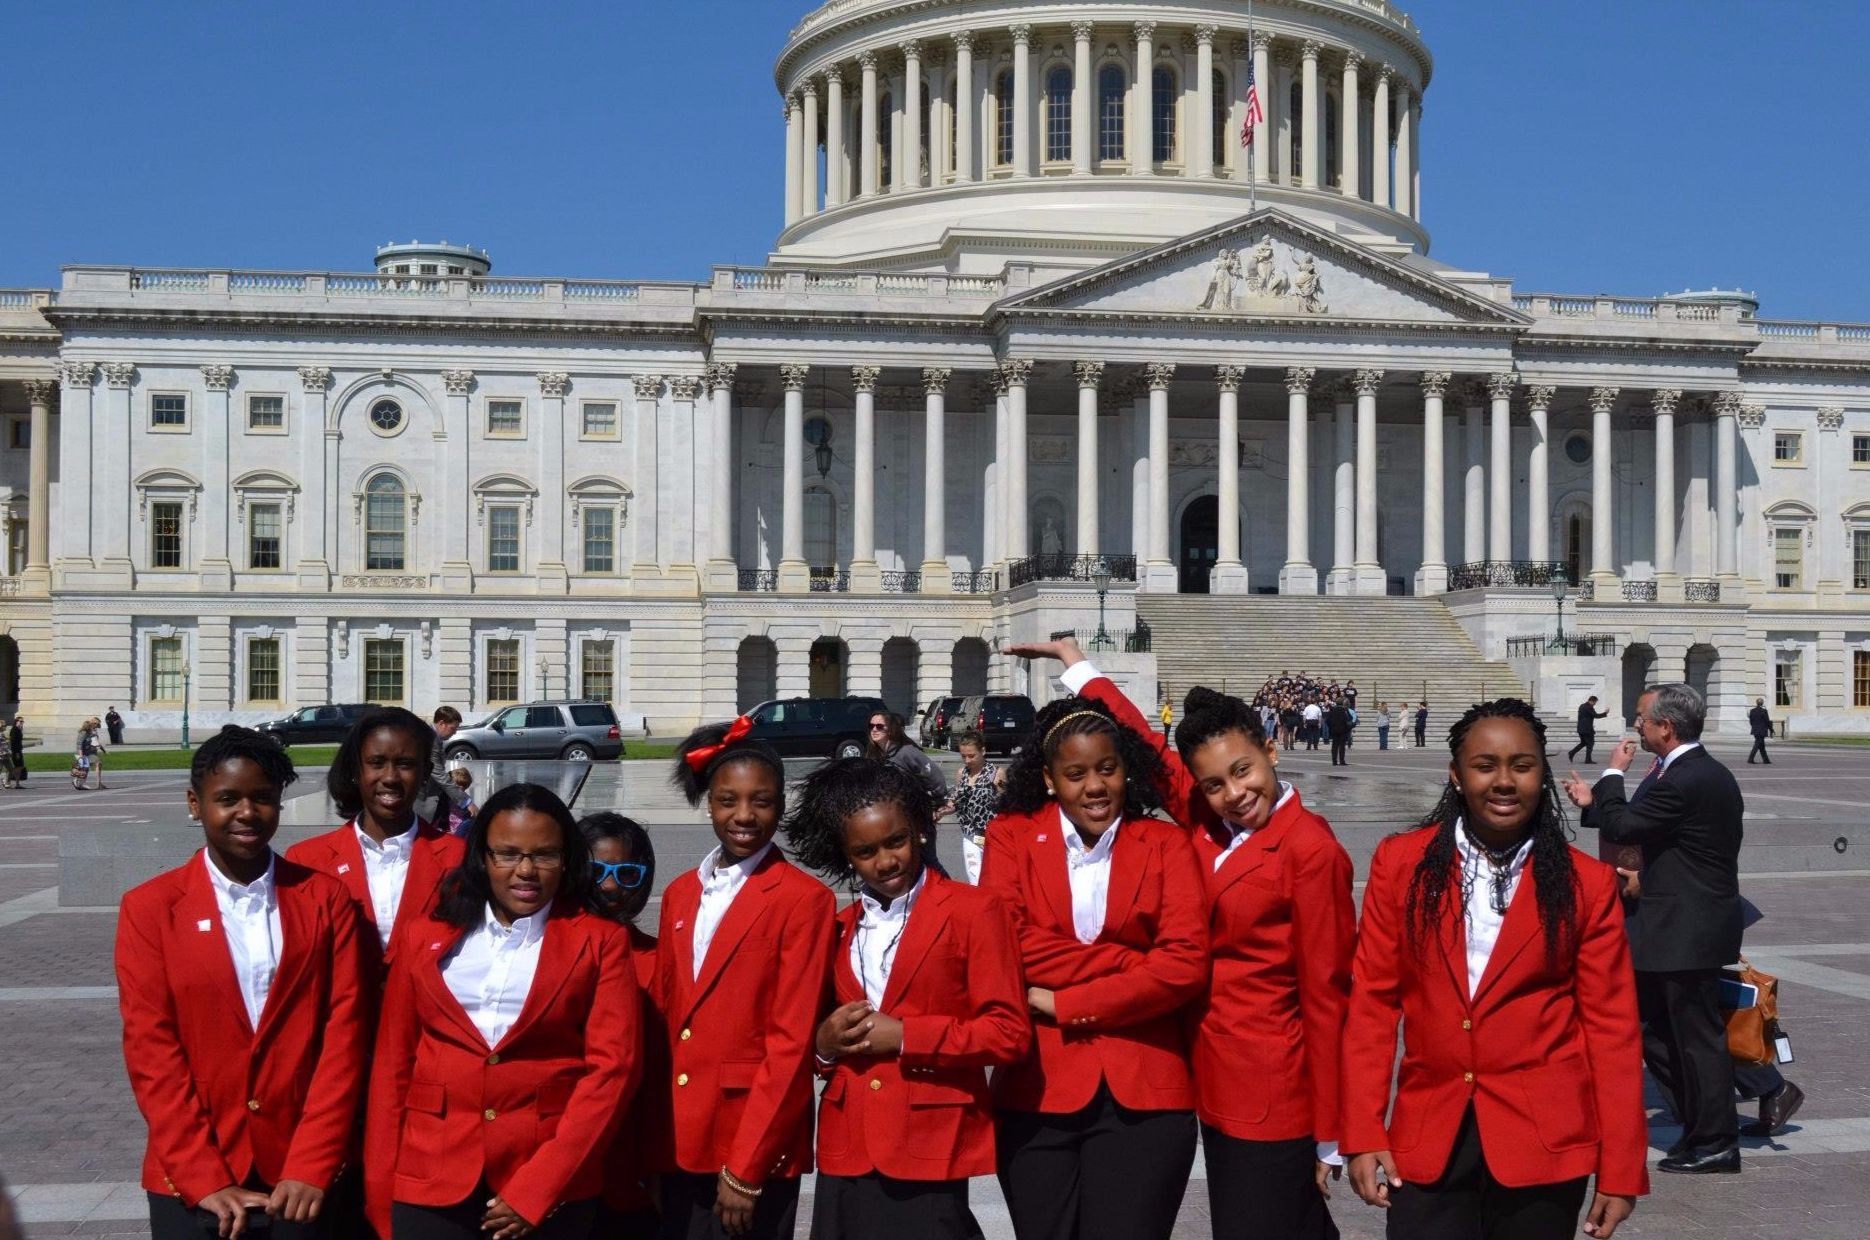 Girls Inc. Adopts a Network-Wide Policy & Advocacy Platform